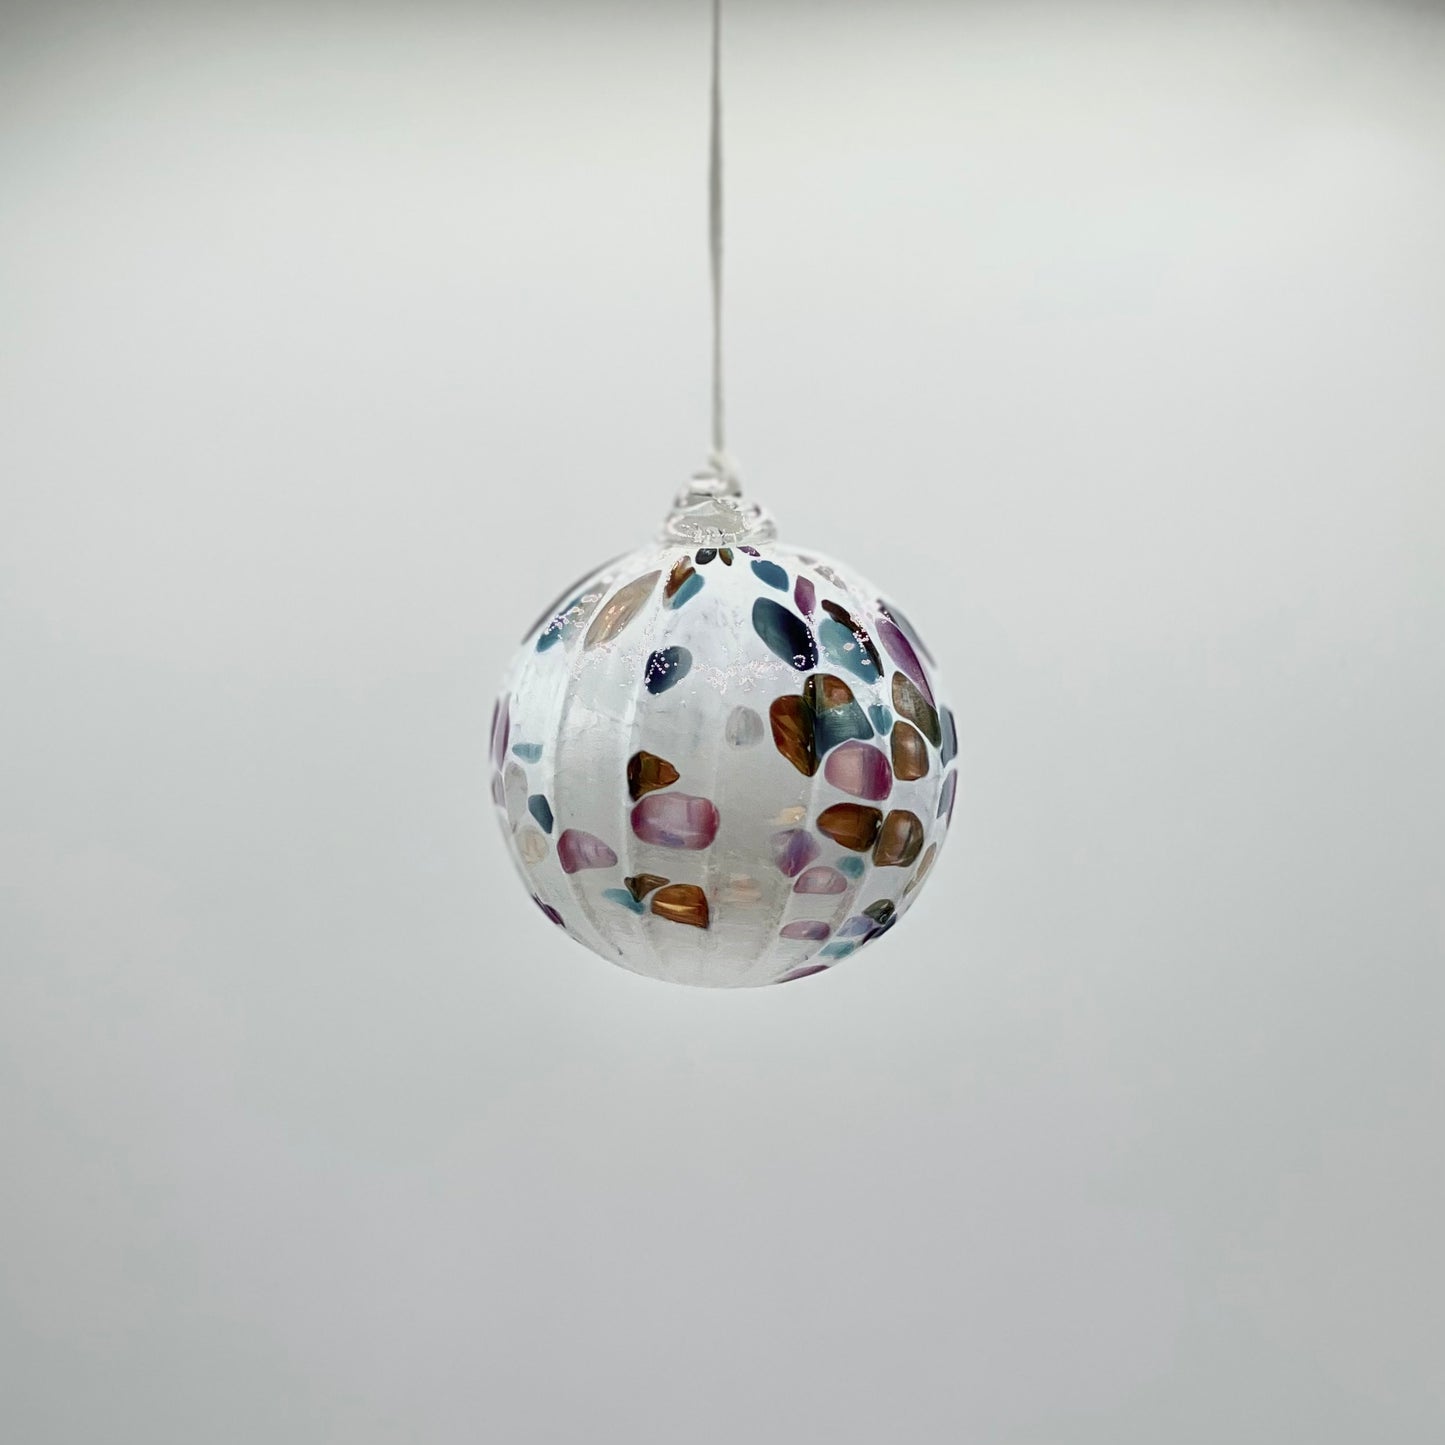 Small Ball Ornament by Glass Roots